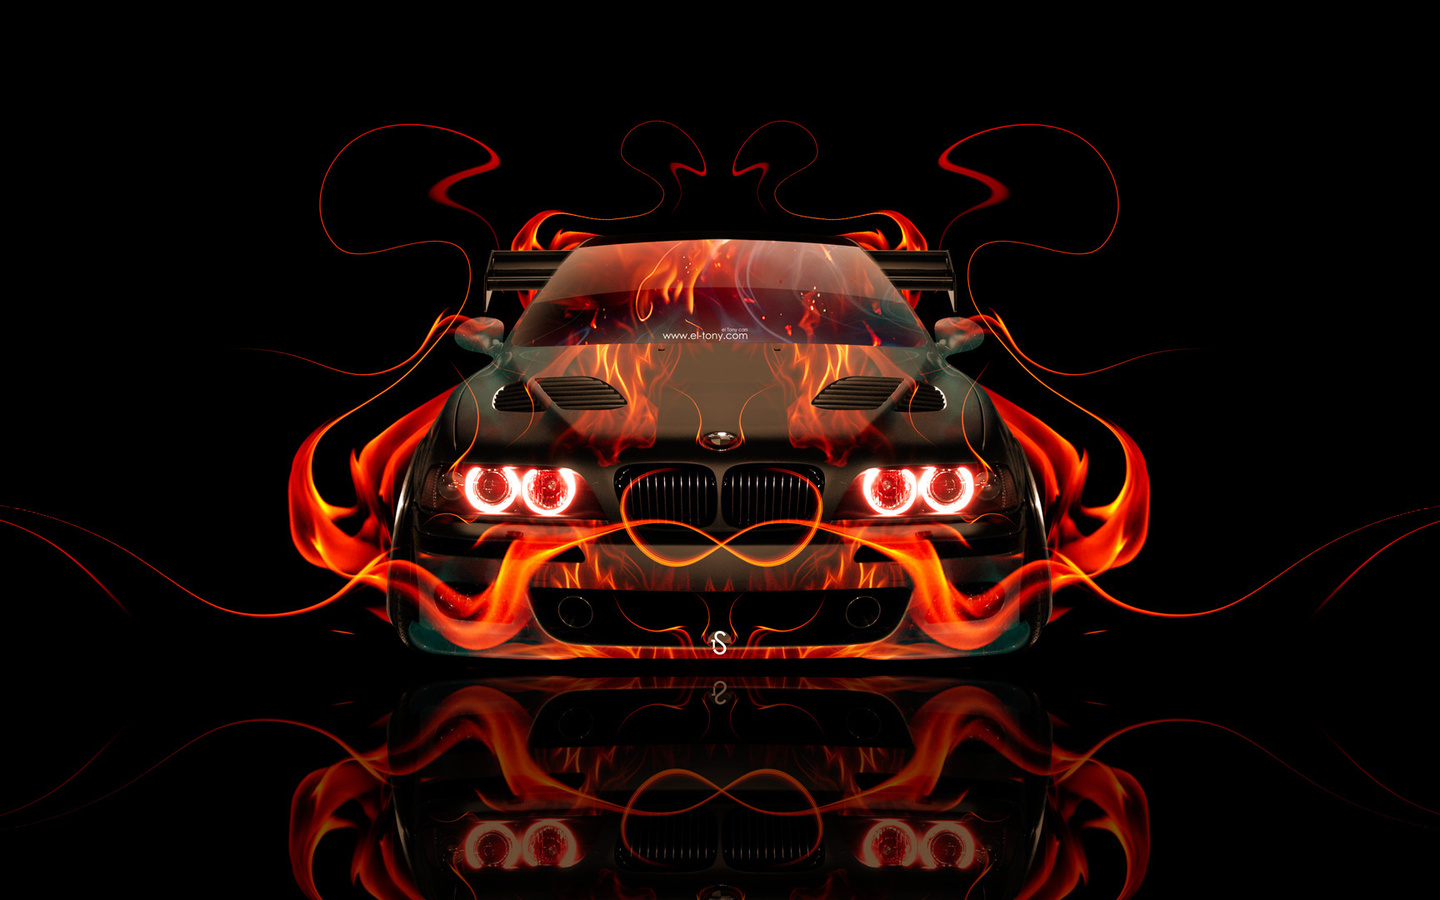 tony kokhan, bmw, m5, e39, fire, car, front, orange, flame, black, abstract, el tony cars, photoshop, design, art, style, hd wallpapers,  , , , 5, 39,  , , , , , , , , , , 